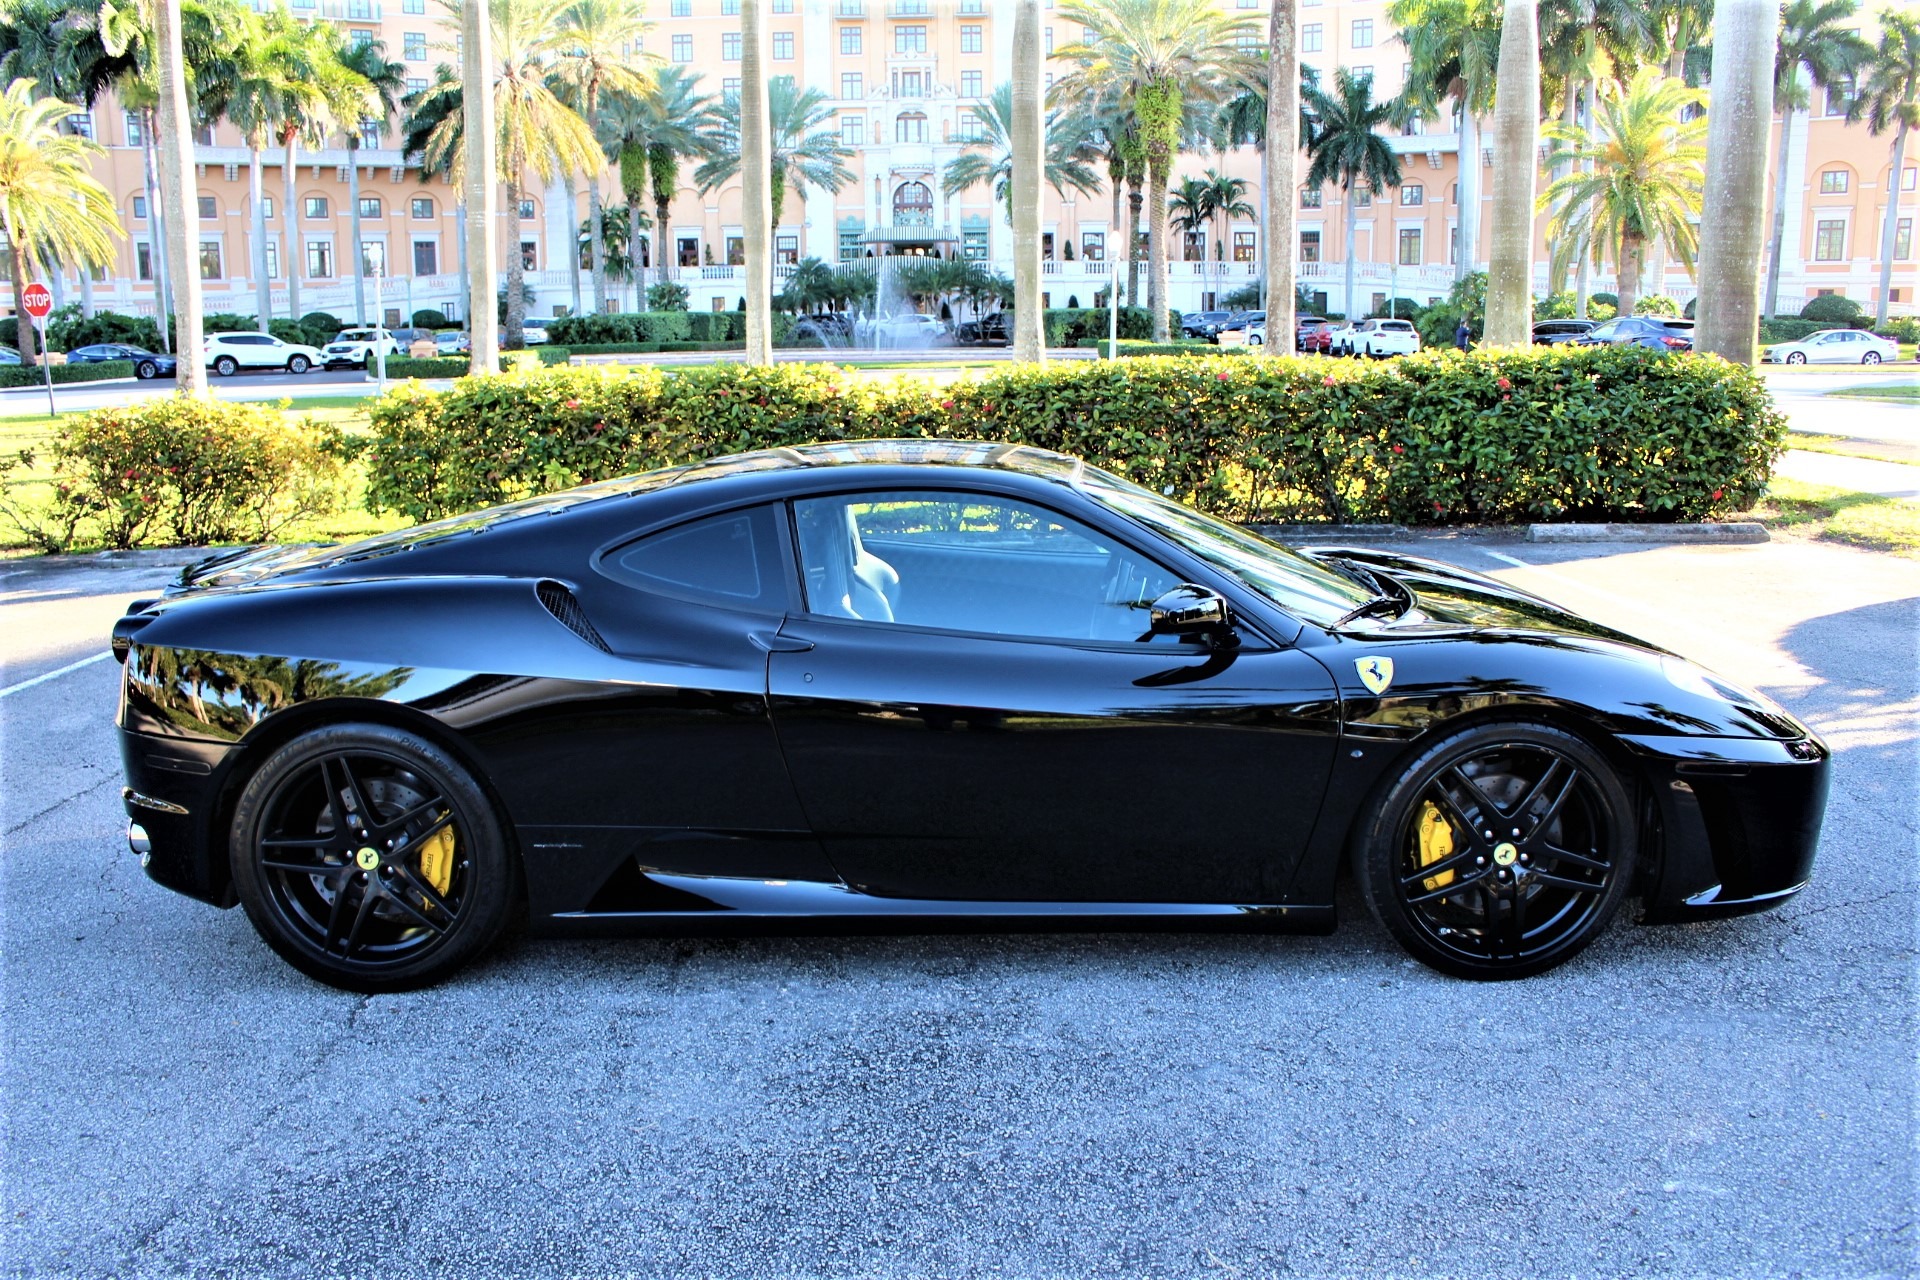 Used 2005 Ferrari F430 for sale Sold at The Gables Sports Cars in Miami FL 33146 2